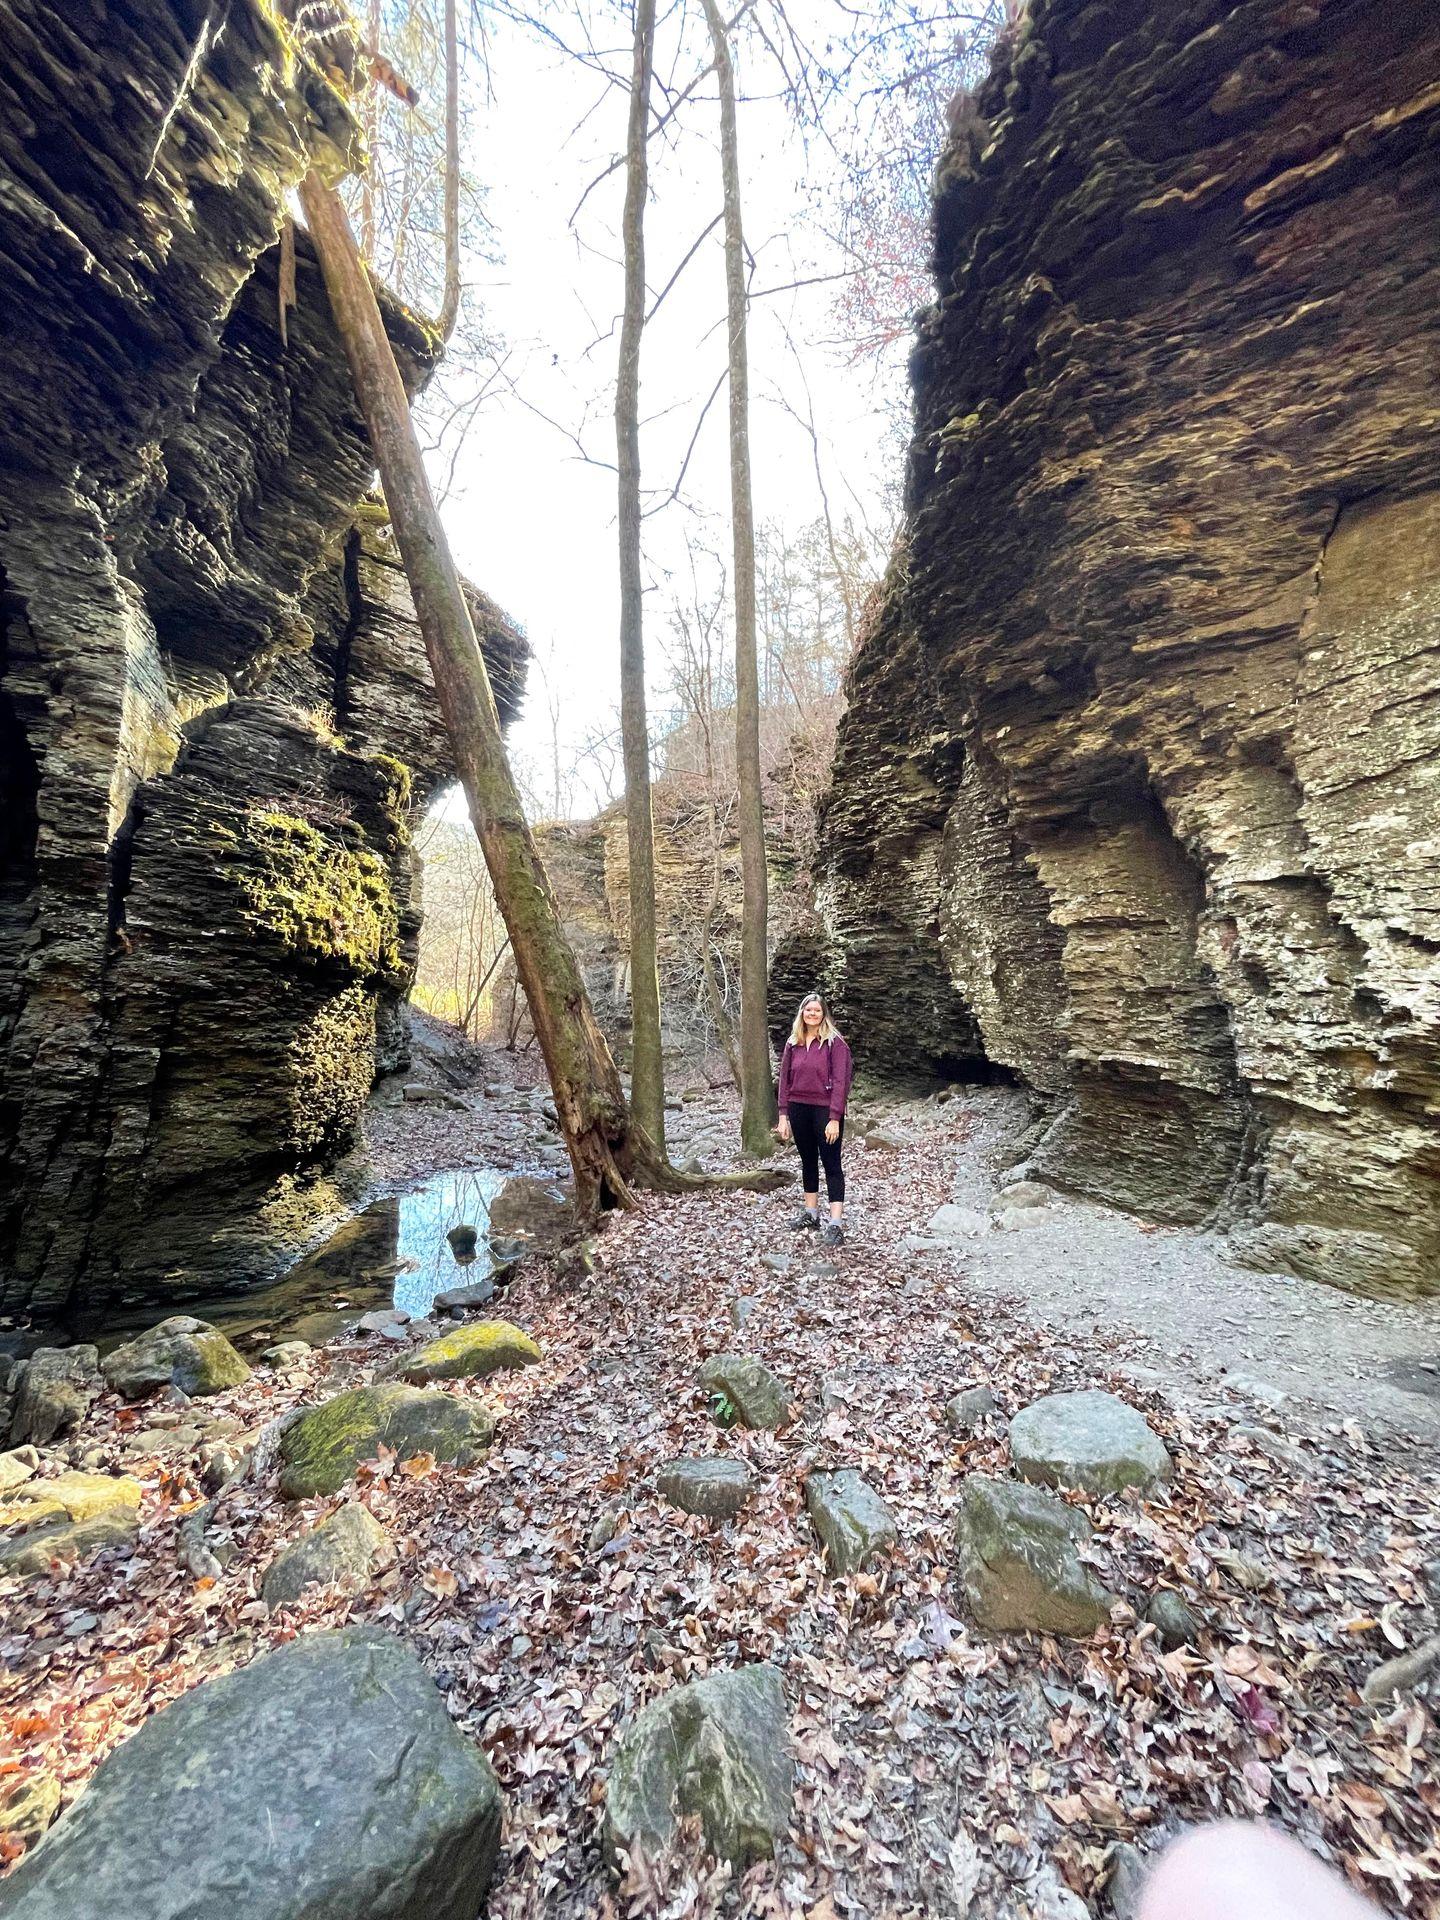 Lydia standing with rock walls surrounding her at the Fuzzybutt Falls trail.